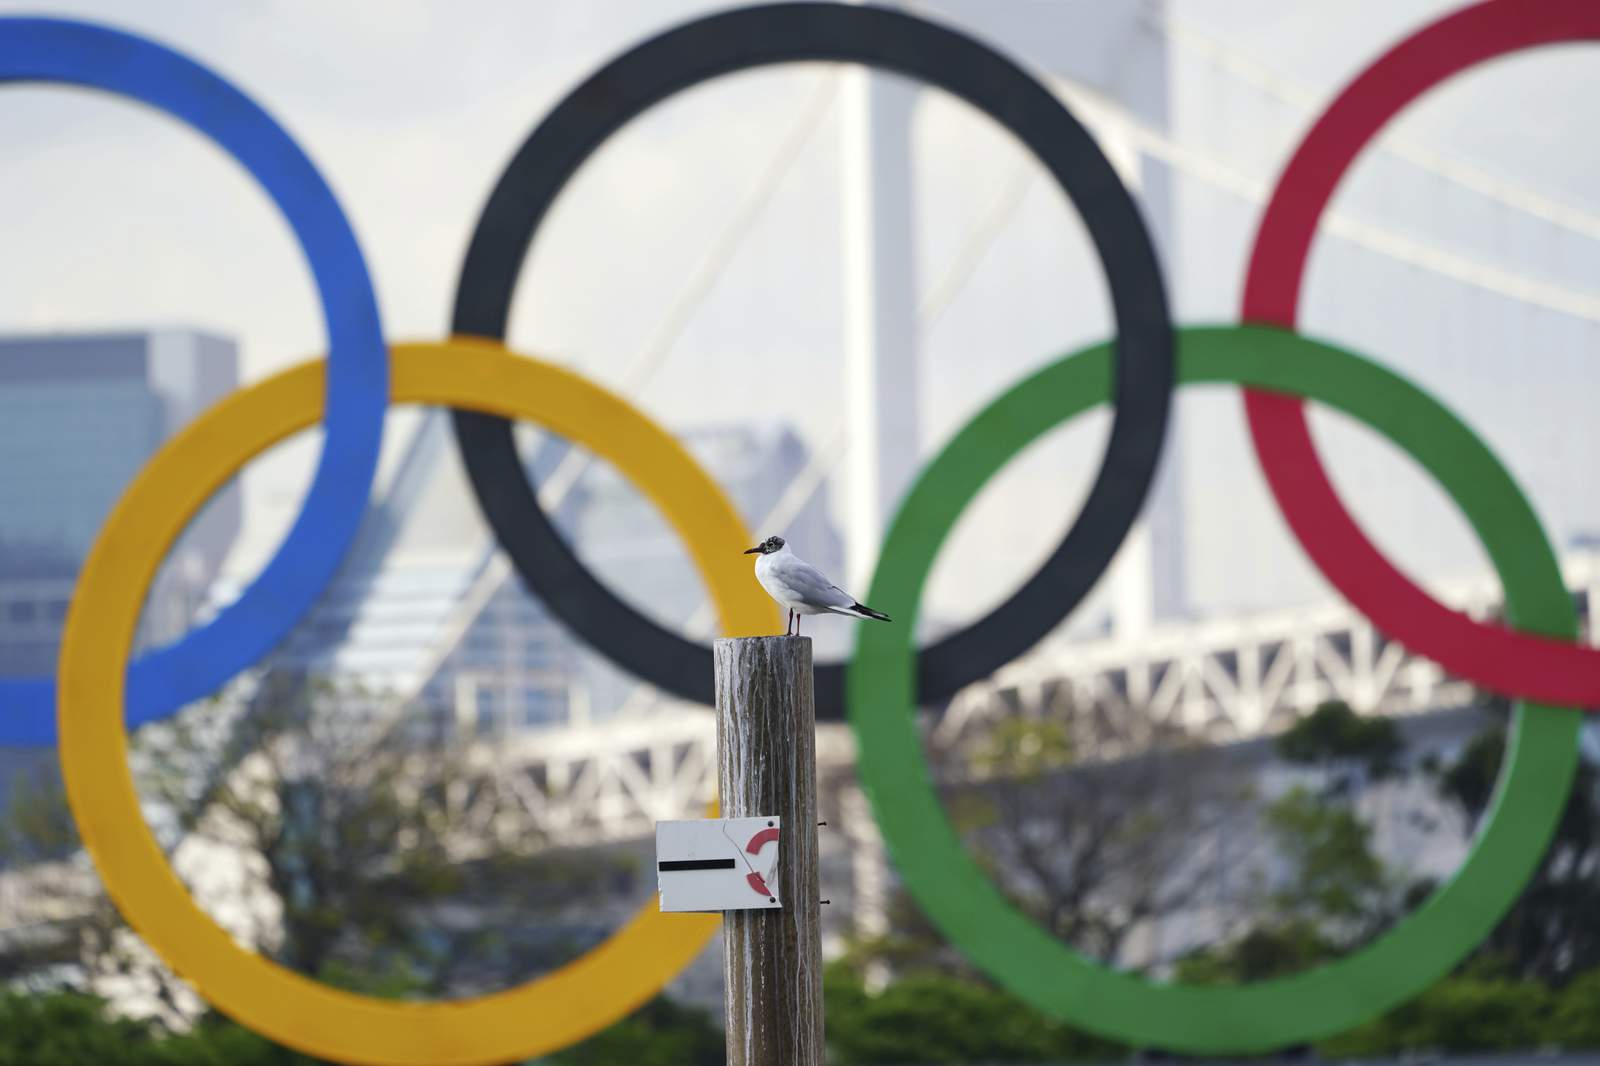 Officials say Olympic cancellation, no fans still an option